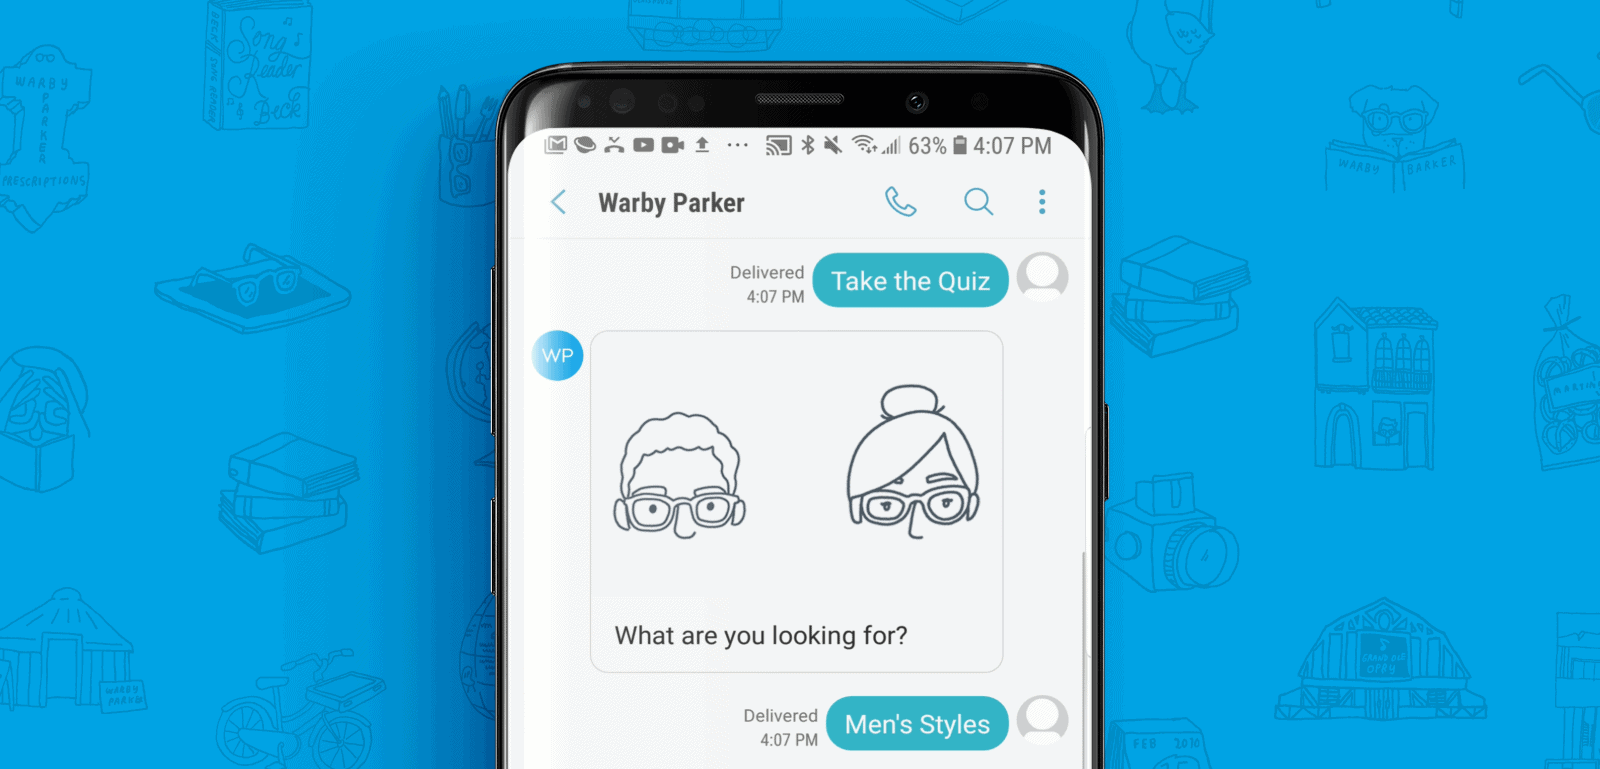 RCS Business Messaging Examples from Warby Parker - Header Image